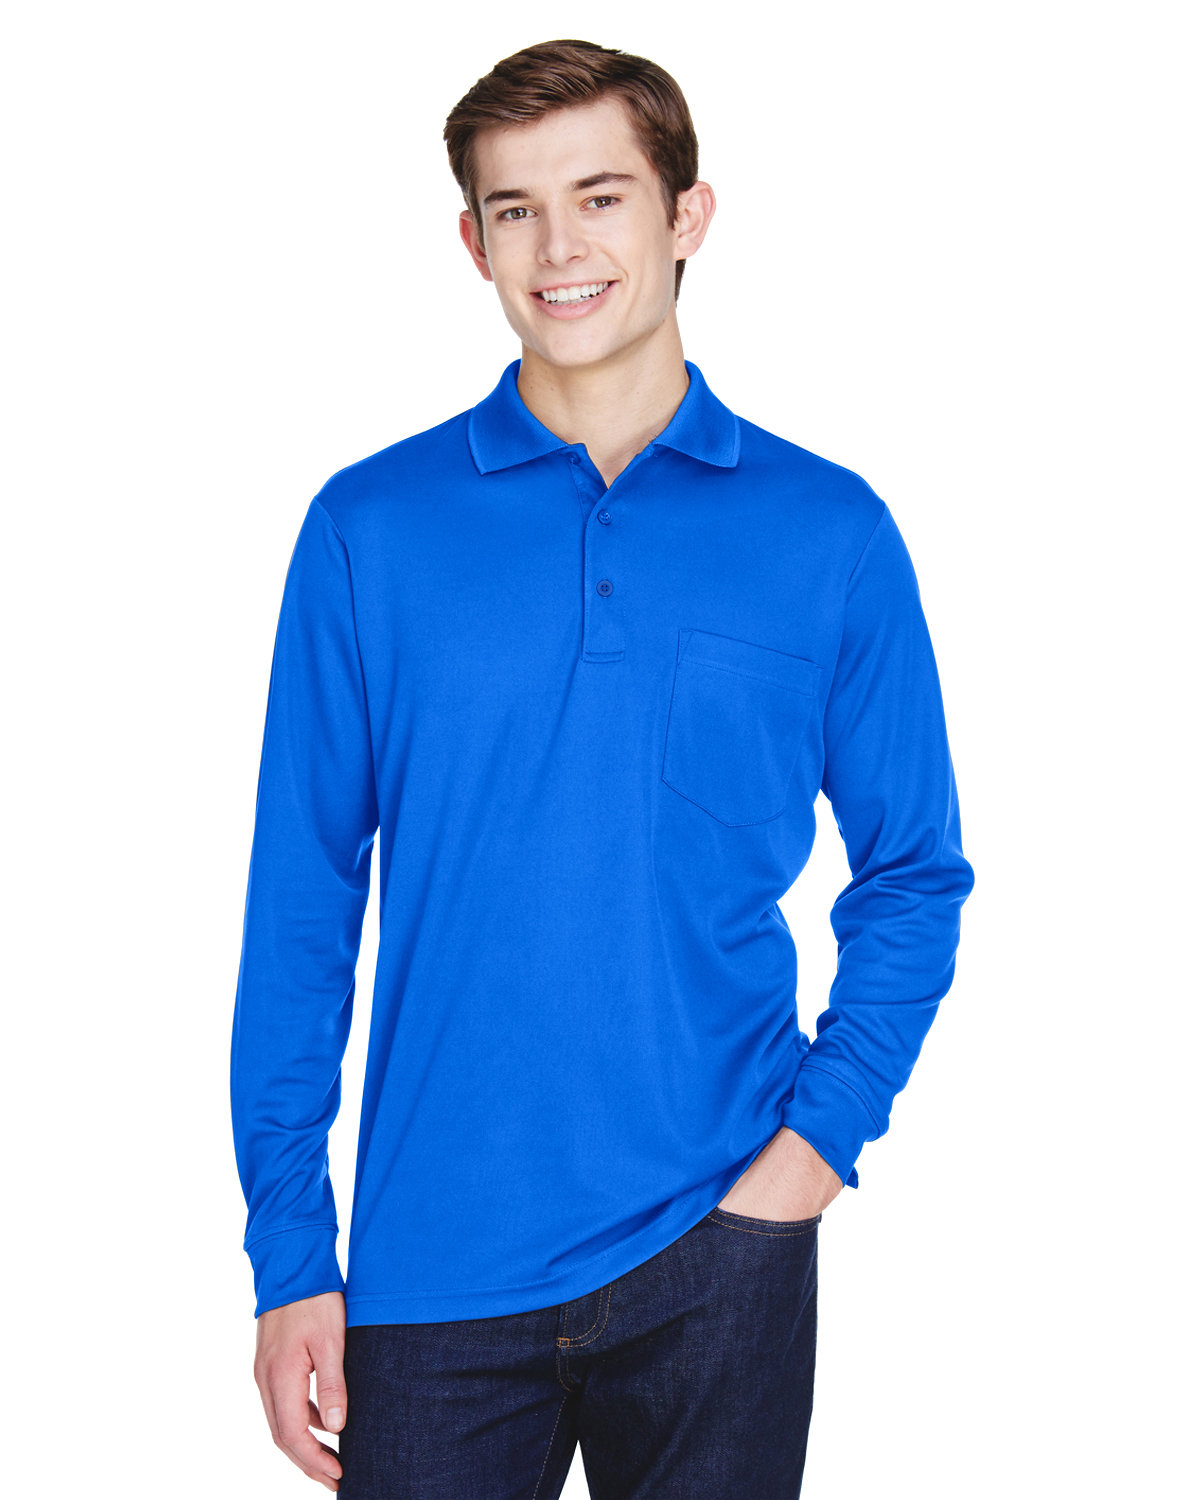 Core365 Adult Pinnacle Performance Long-Sleeve Piqué Polo with Pocket TRUE ROYAL 